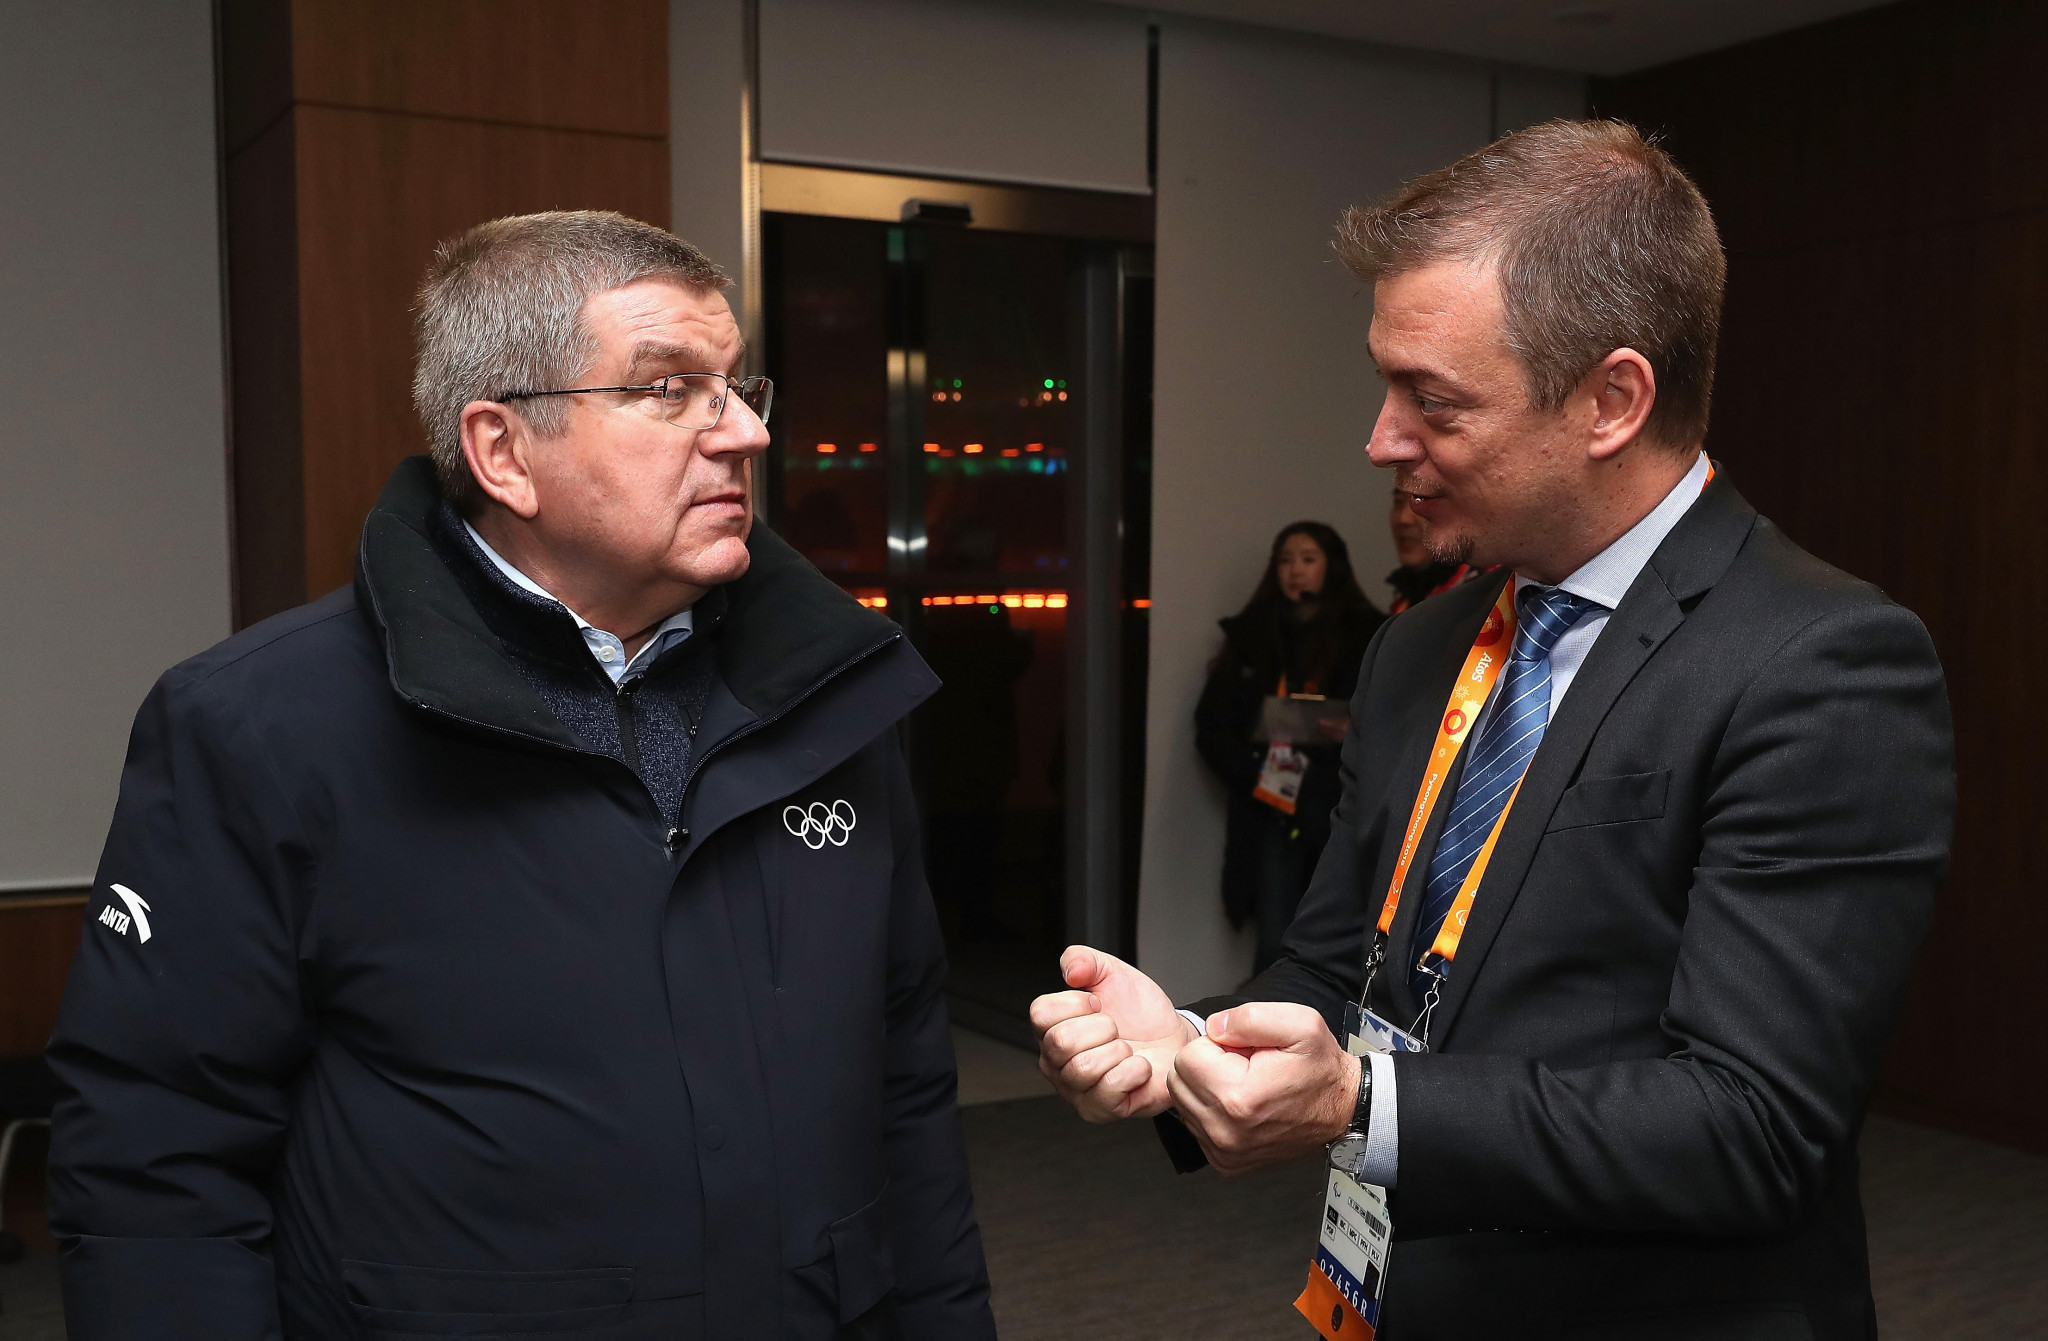 IOC President Thomas Bach, left, joined his IPC counterpart Andrew Parsons at tonight's ceremony in Pyeongchang ©Getty Images